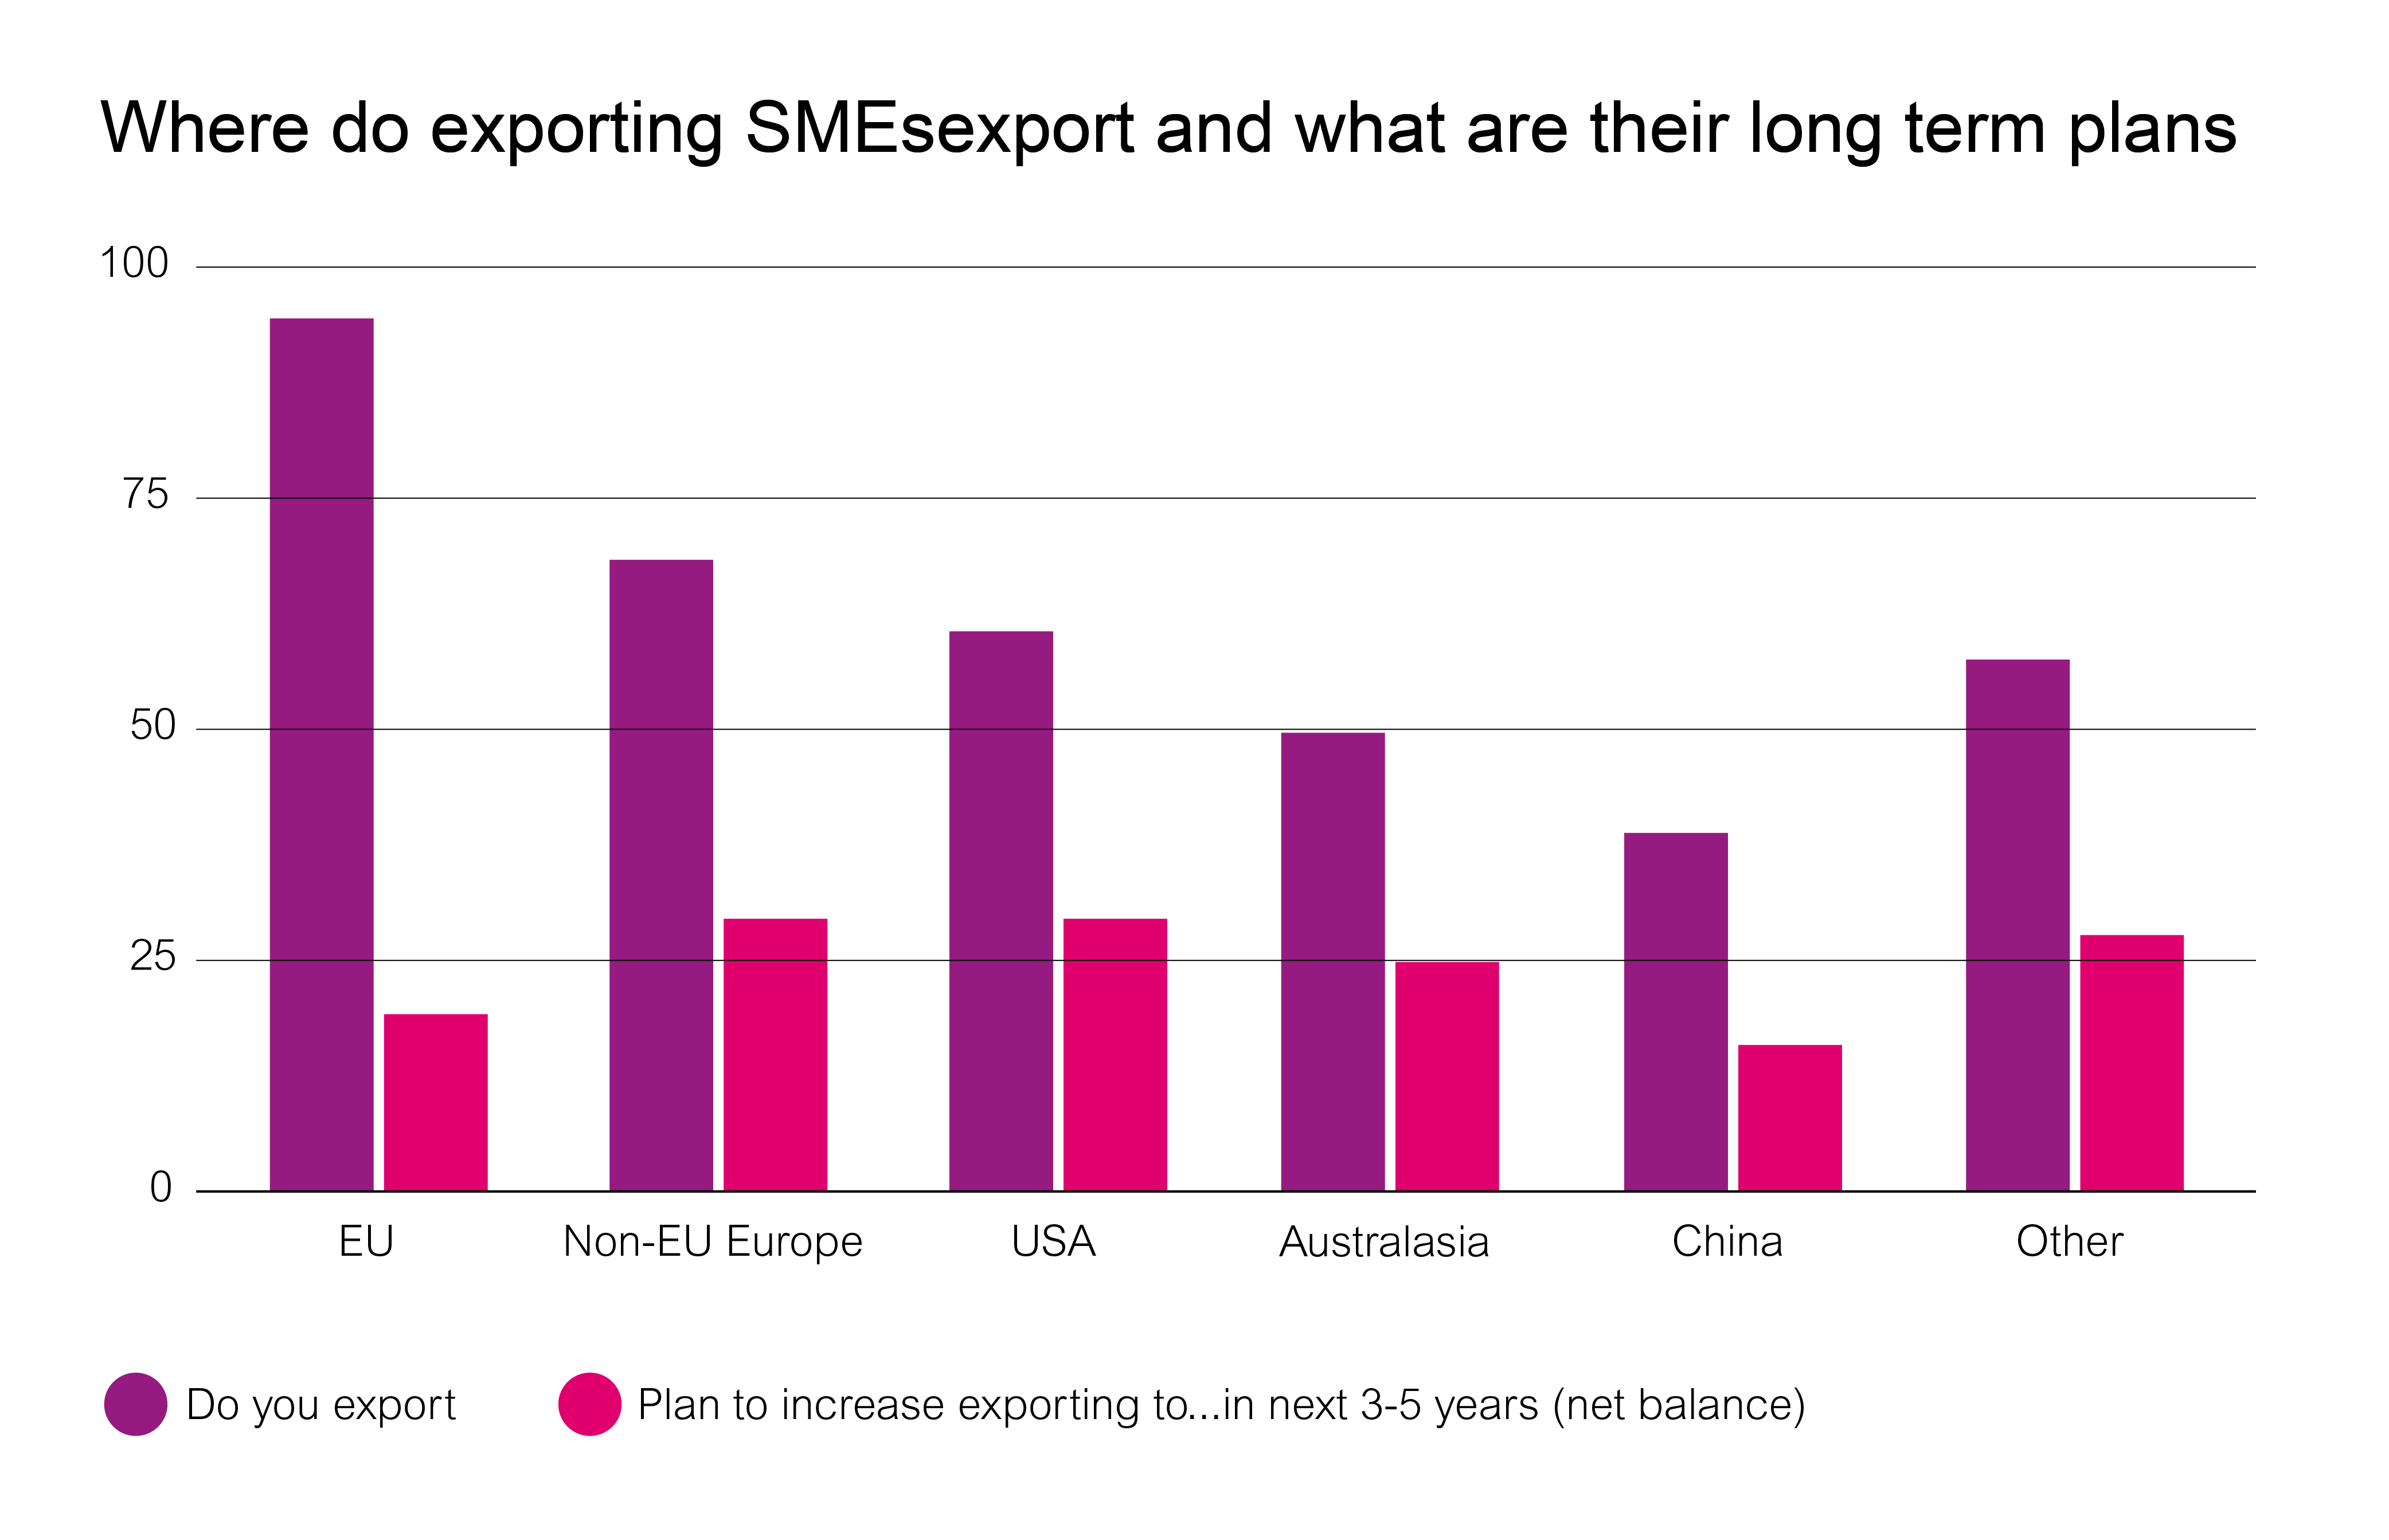 Where do exporting SMEs export and what are their long term plans